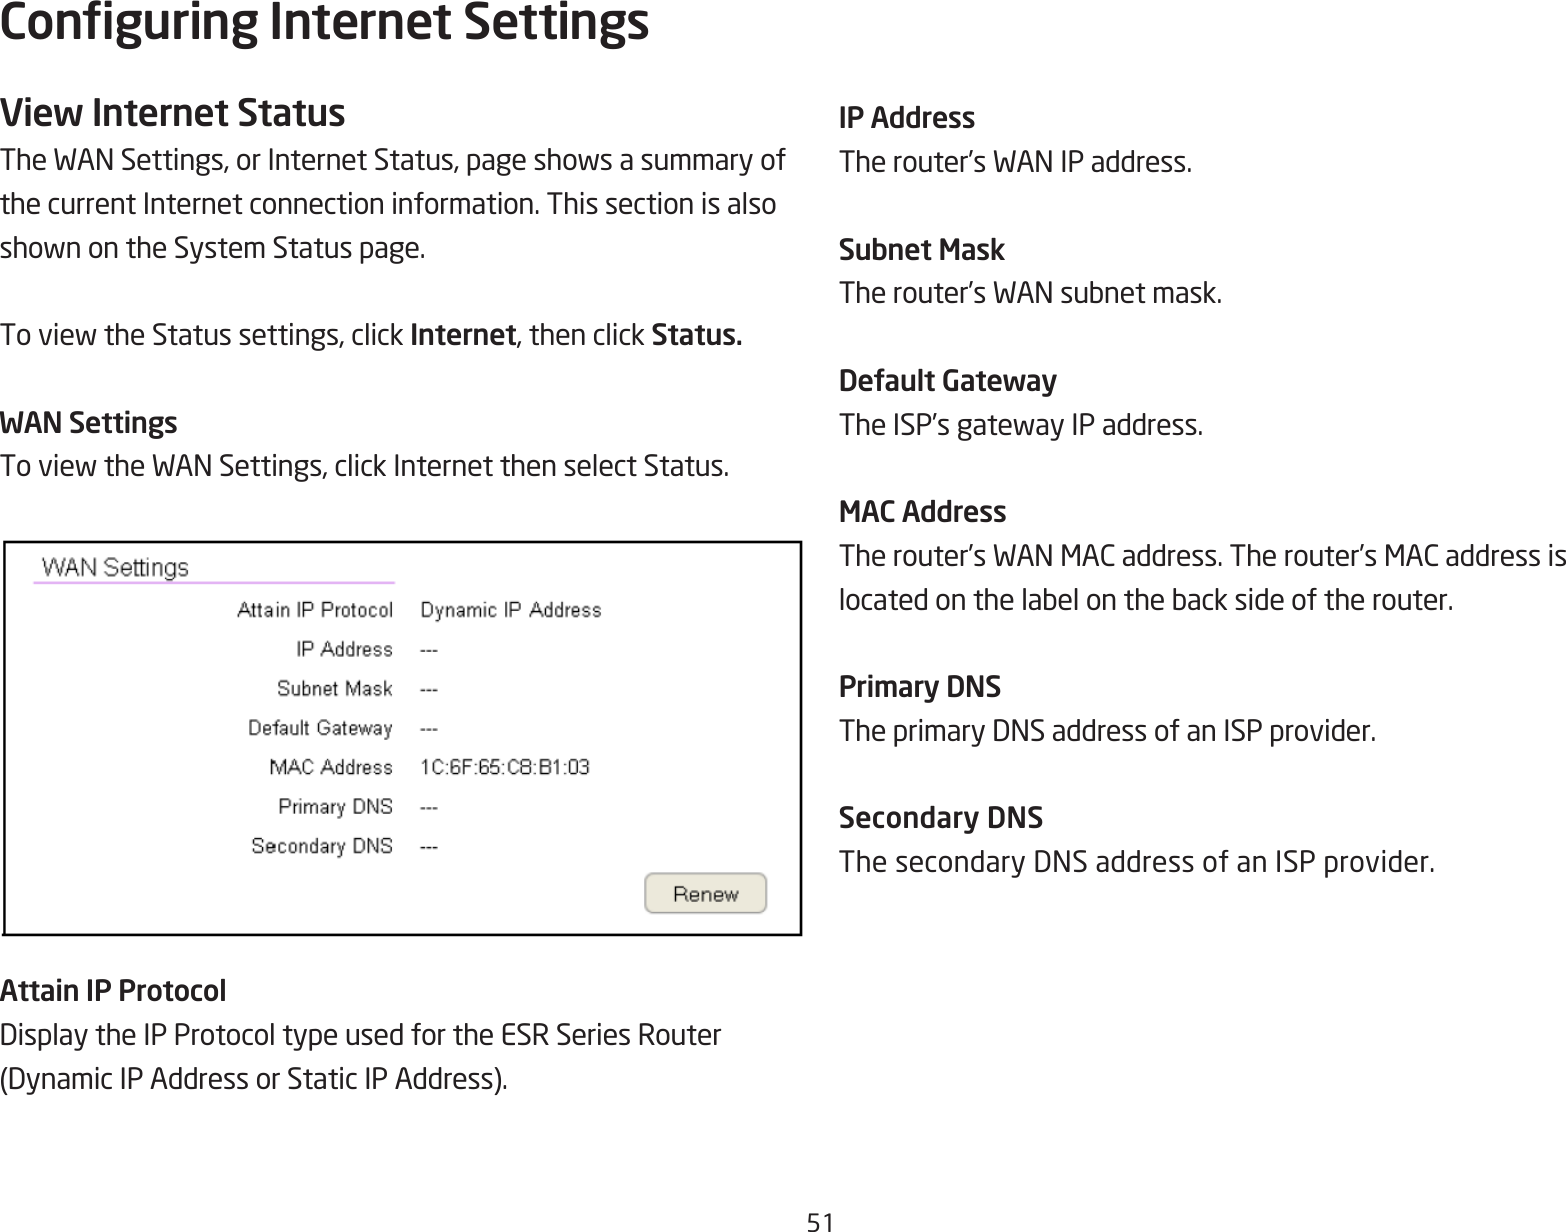 51Conguring Internet SettingsView Internet StatusTheWANSettings,orInternetStatus,pageshowsasummaryofthe current Internet connection information. This section is alsoshownontheSystemStatuspage.ToviewtheStatussettings,clickInternet, then click Status.WAN SettingsToviewtheWANSettings,clickInternetthenselectStatus.Attain IP ProtocolDisplaytheIPProtocoltypeusedfortheESRSeriesRouter(DynamicIPAddressorStaticIPAddress).IP AddressTherouter’sWANIPaddress.Subnet MaskTherouter’sWANsubnetmask.Default GatewayTheISP’sgatewayIPaddress.MAC AddressTherouter’sWANMACaddress.Therouter’sMACaddressislocatedonthelabelonthebacksideoftherouter.Primary DNSTheprimaryDNSaddressofanISPprovider.Secondary DNSThesecondaryDNSaddressofanISPprovider.